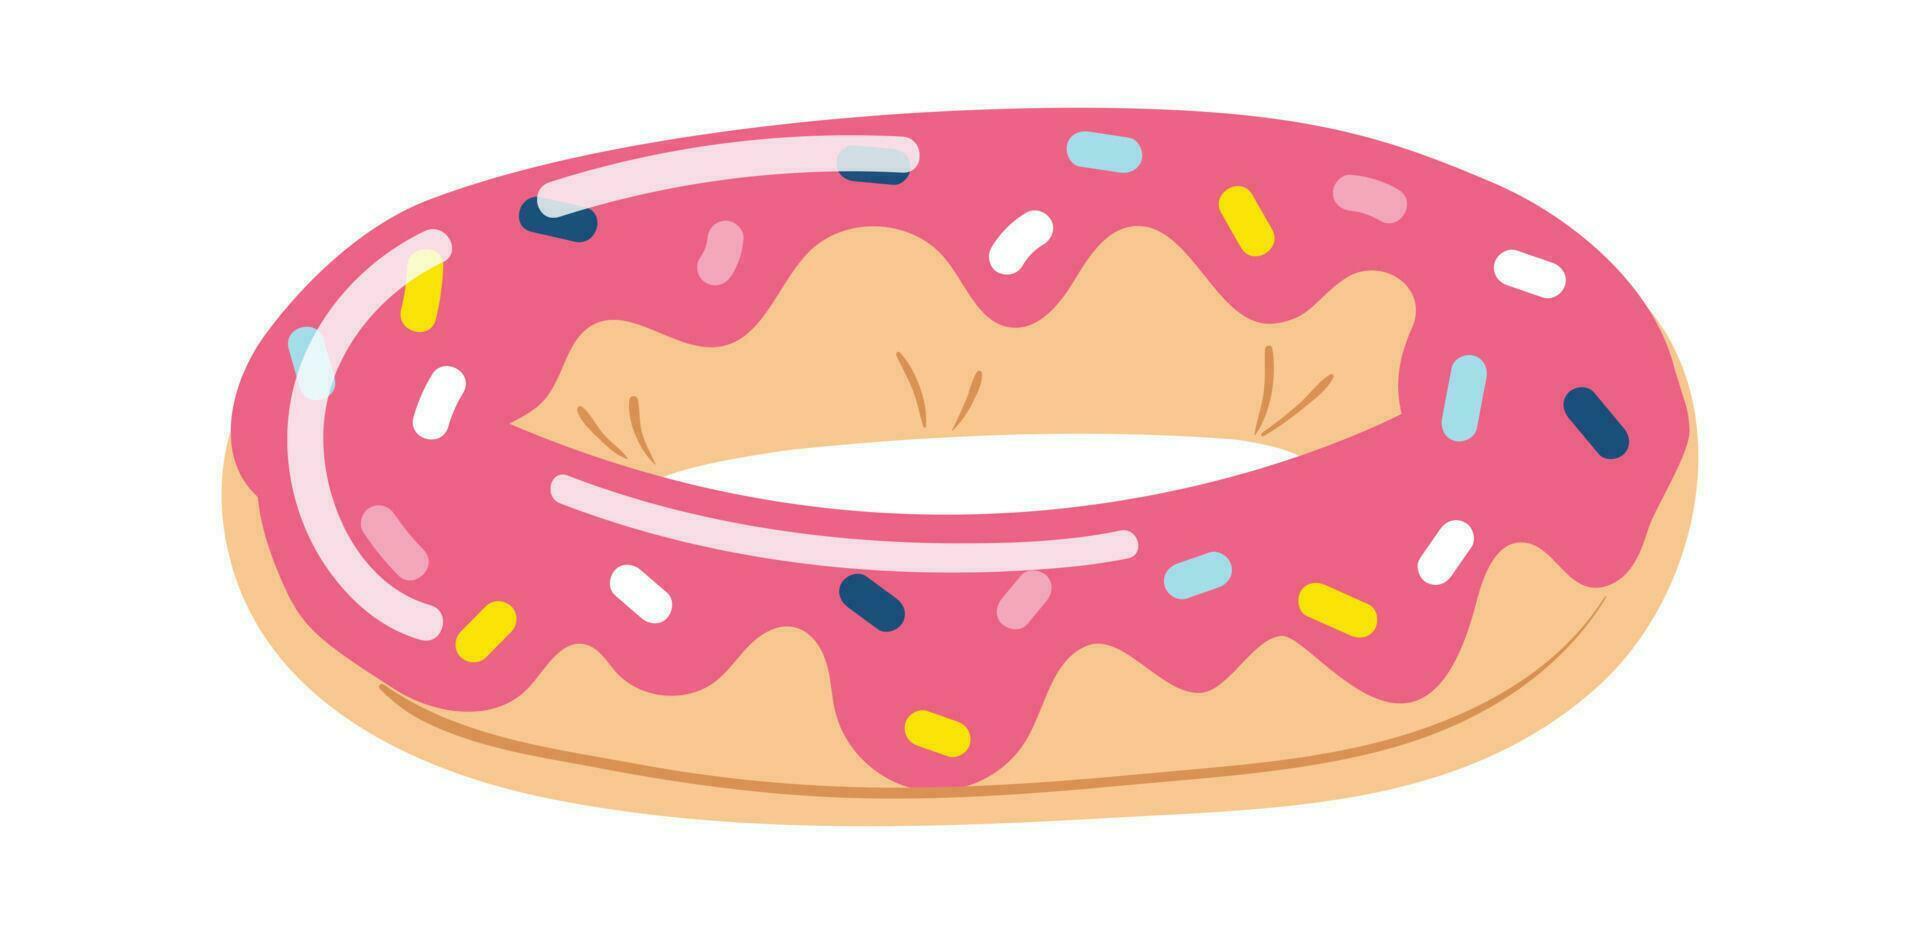 Cartoon colored donut with sweet topping isolated on white background vector